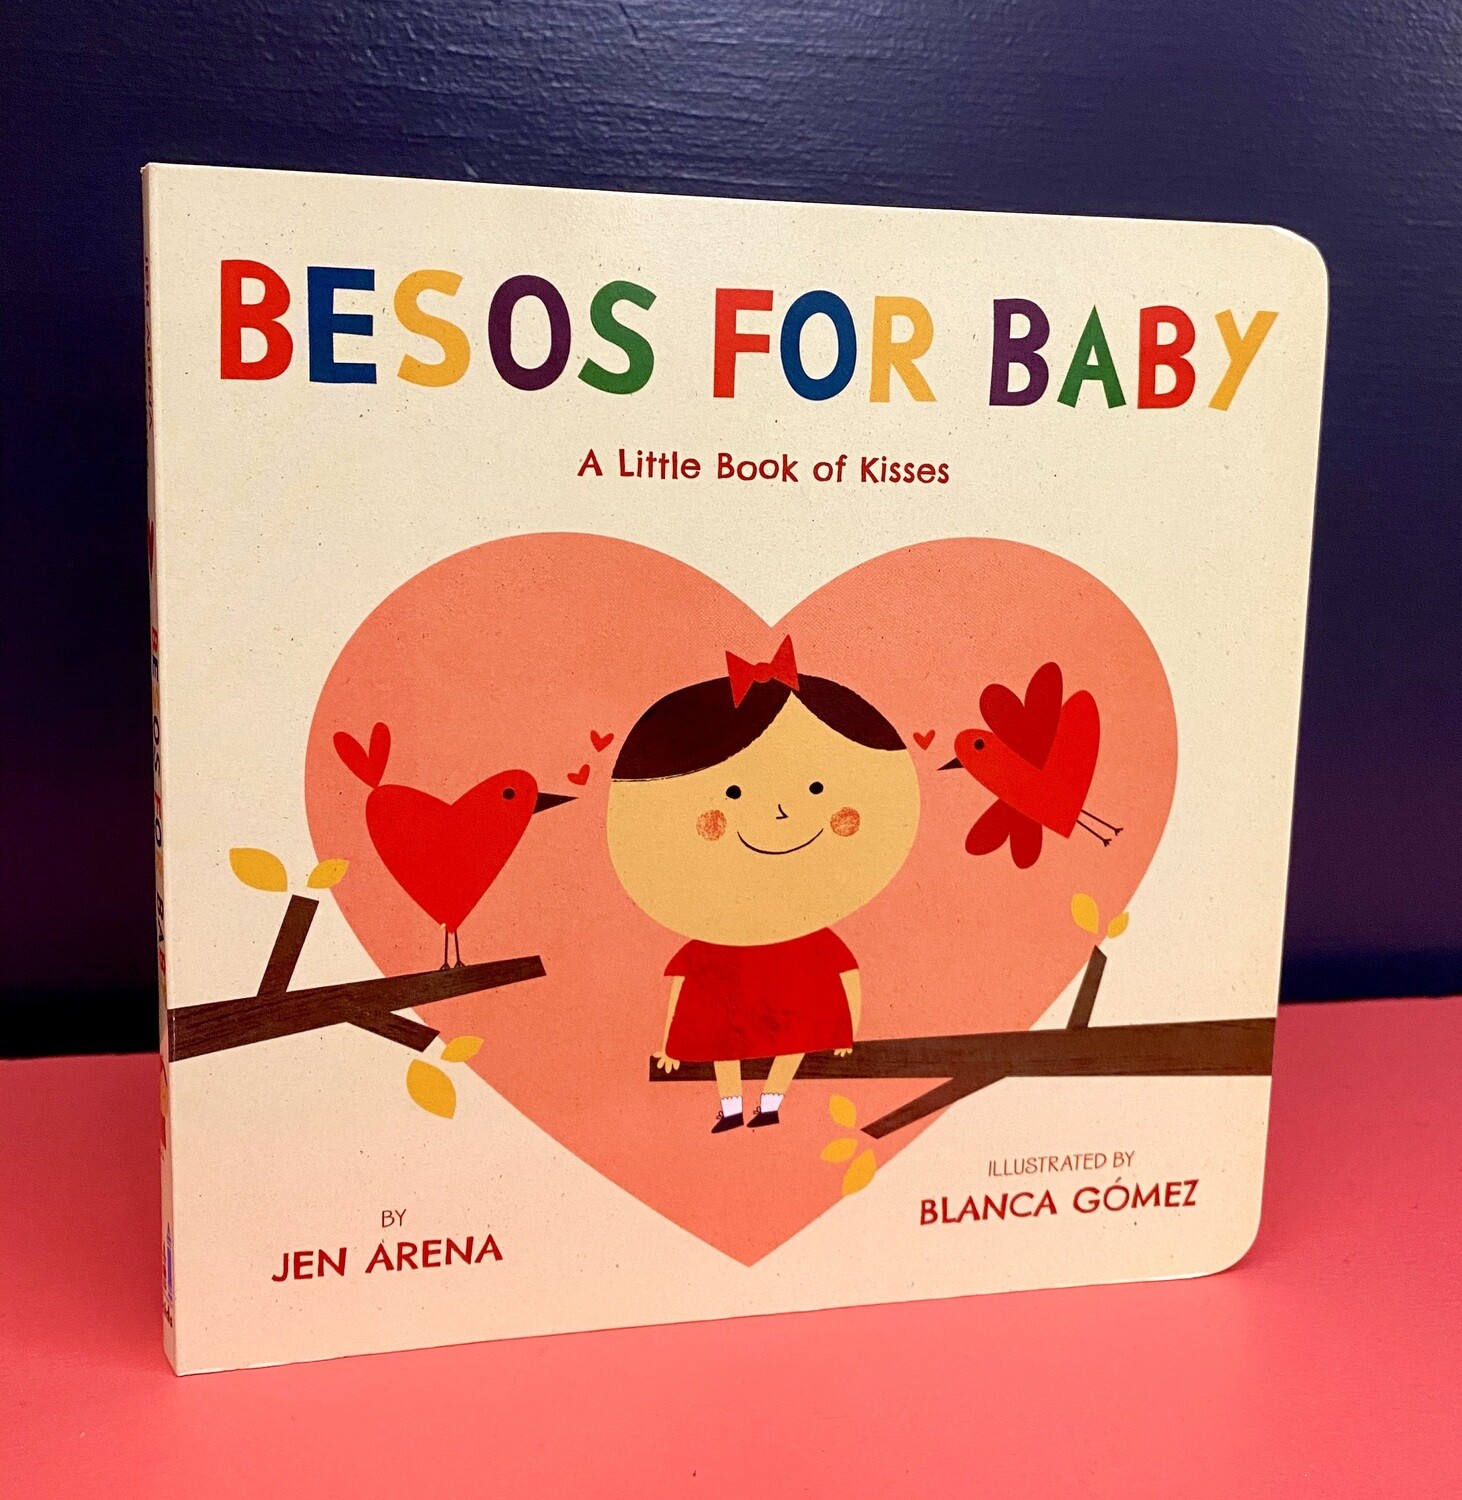 NEW - Besos for Baby, Jen Arena